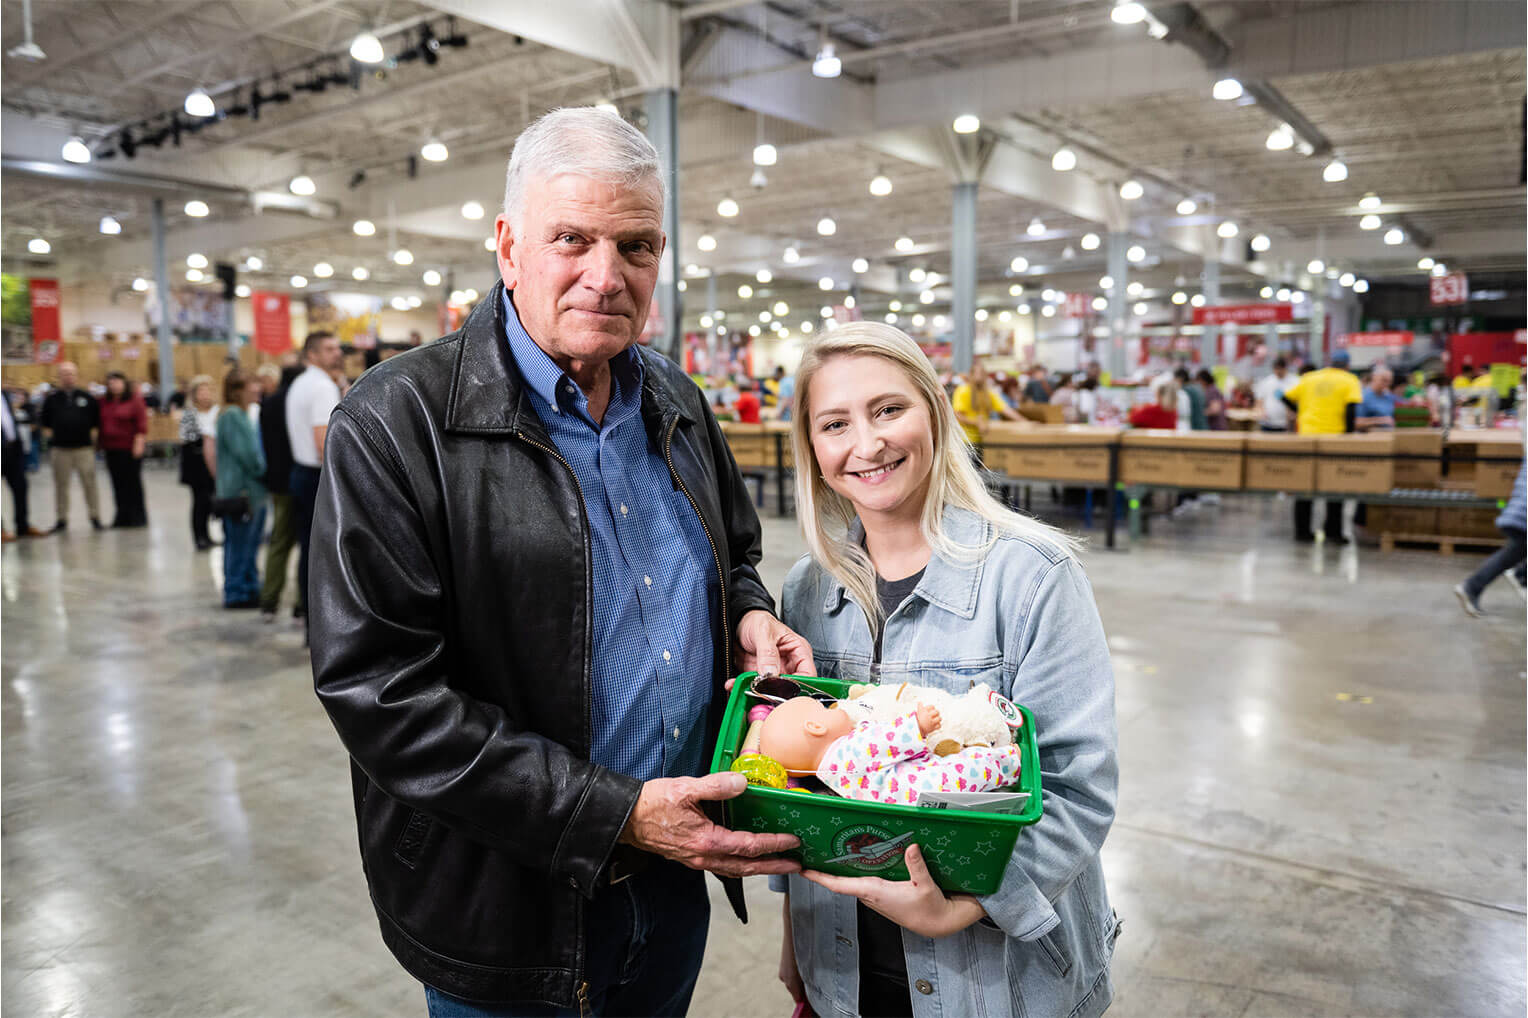 Franklin Graham and Elizabeth Groff in Charlotte with the symbolic 200 millionth shoebox gift.